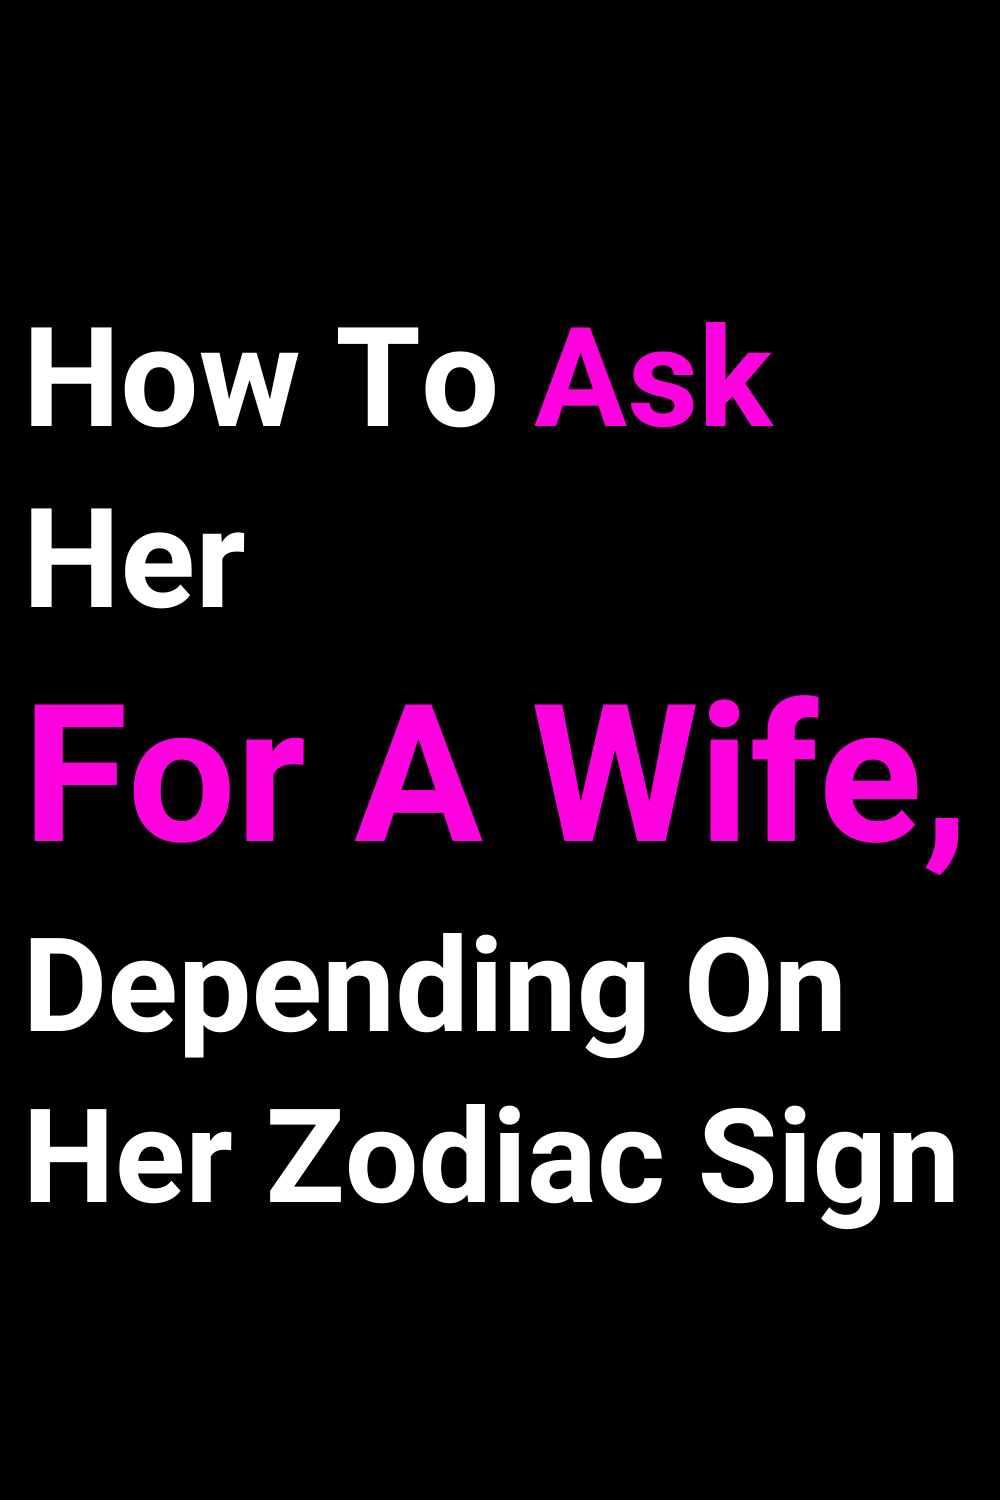 How To Ask Her For A Wife, Depending On Her Zodiac Sign